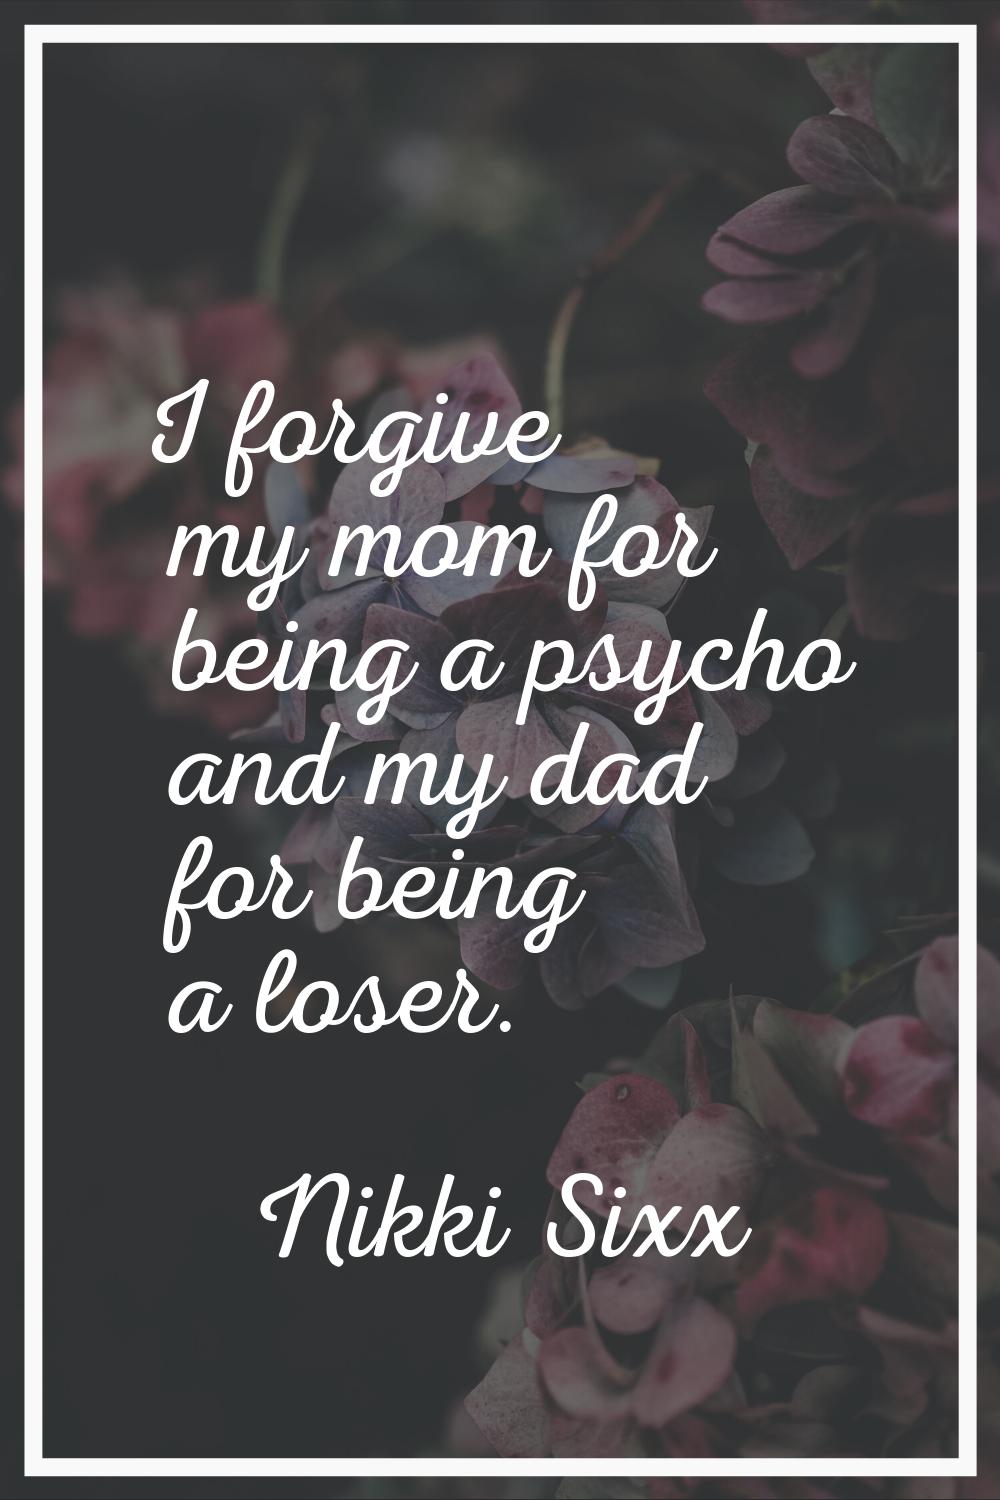 I forgive my mom for being a psycho and my dad for being a loser.